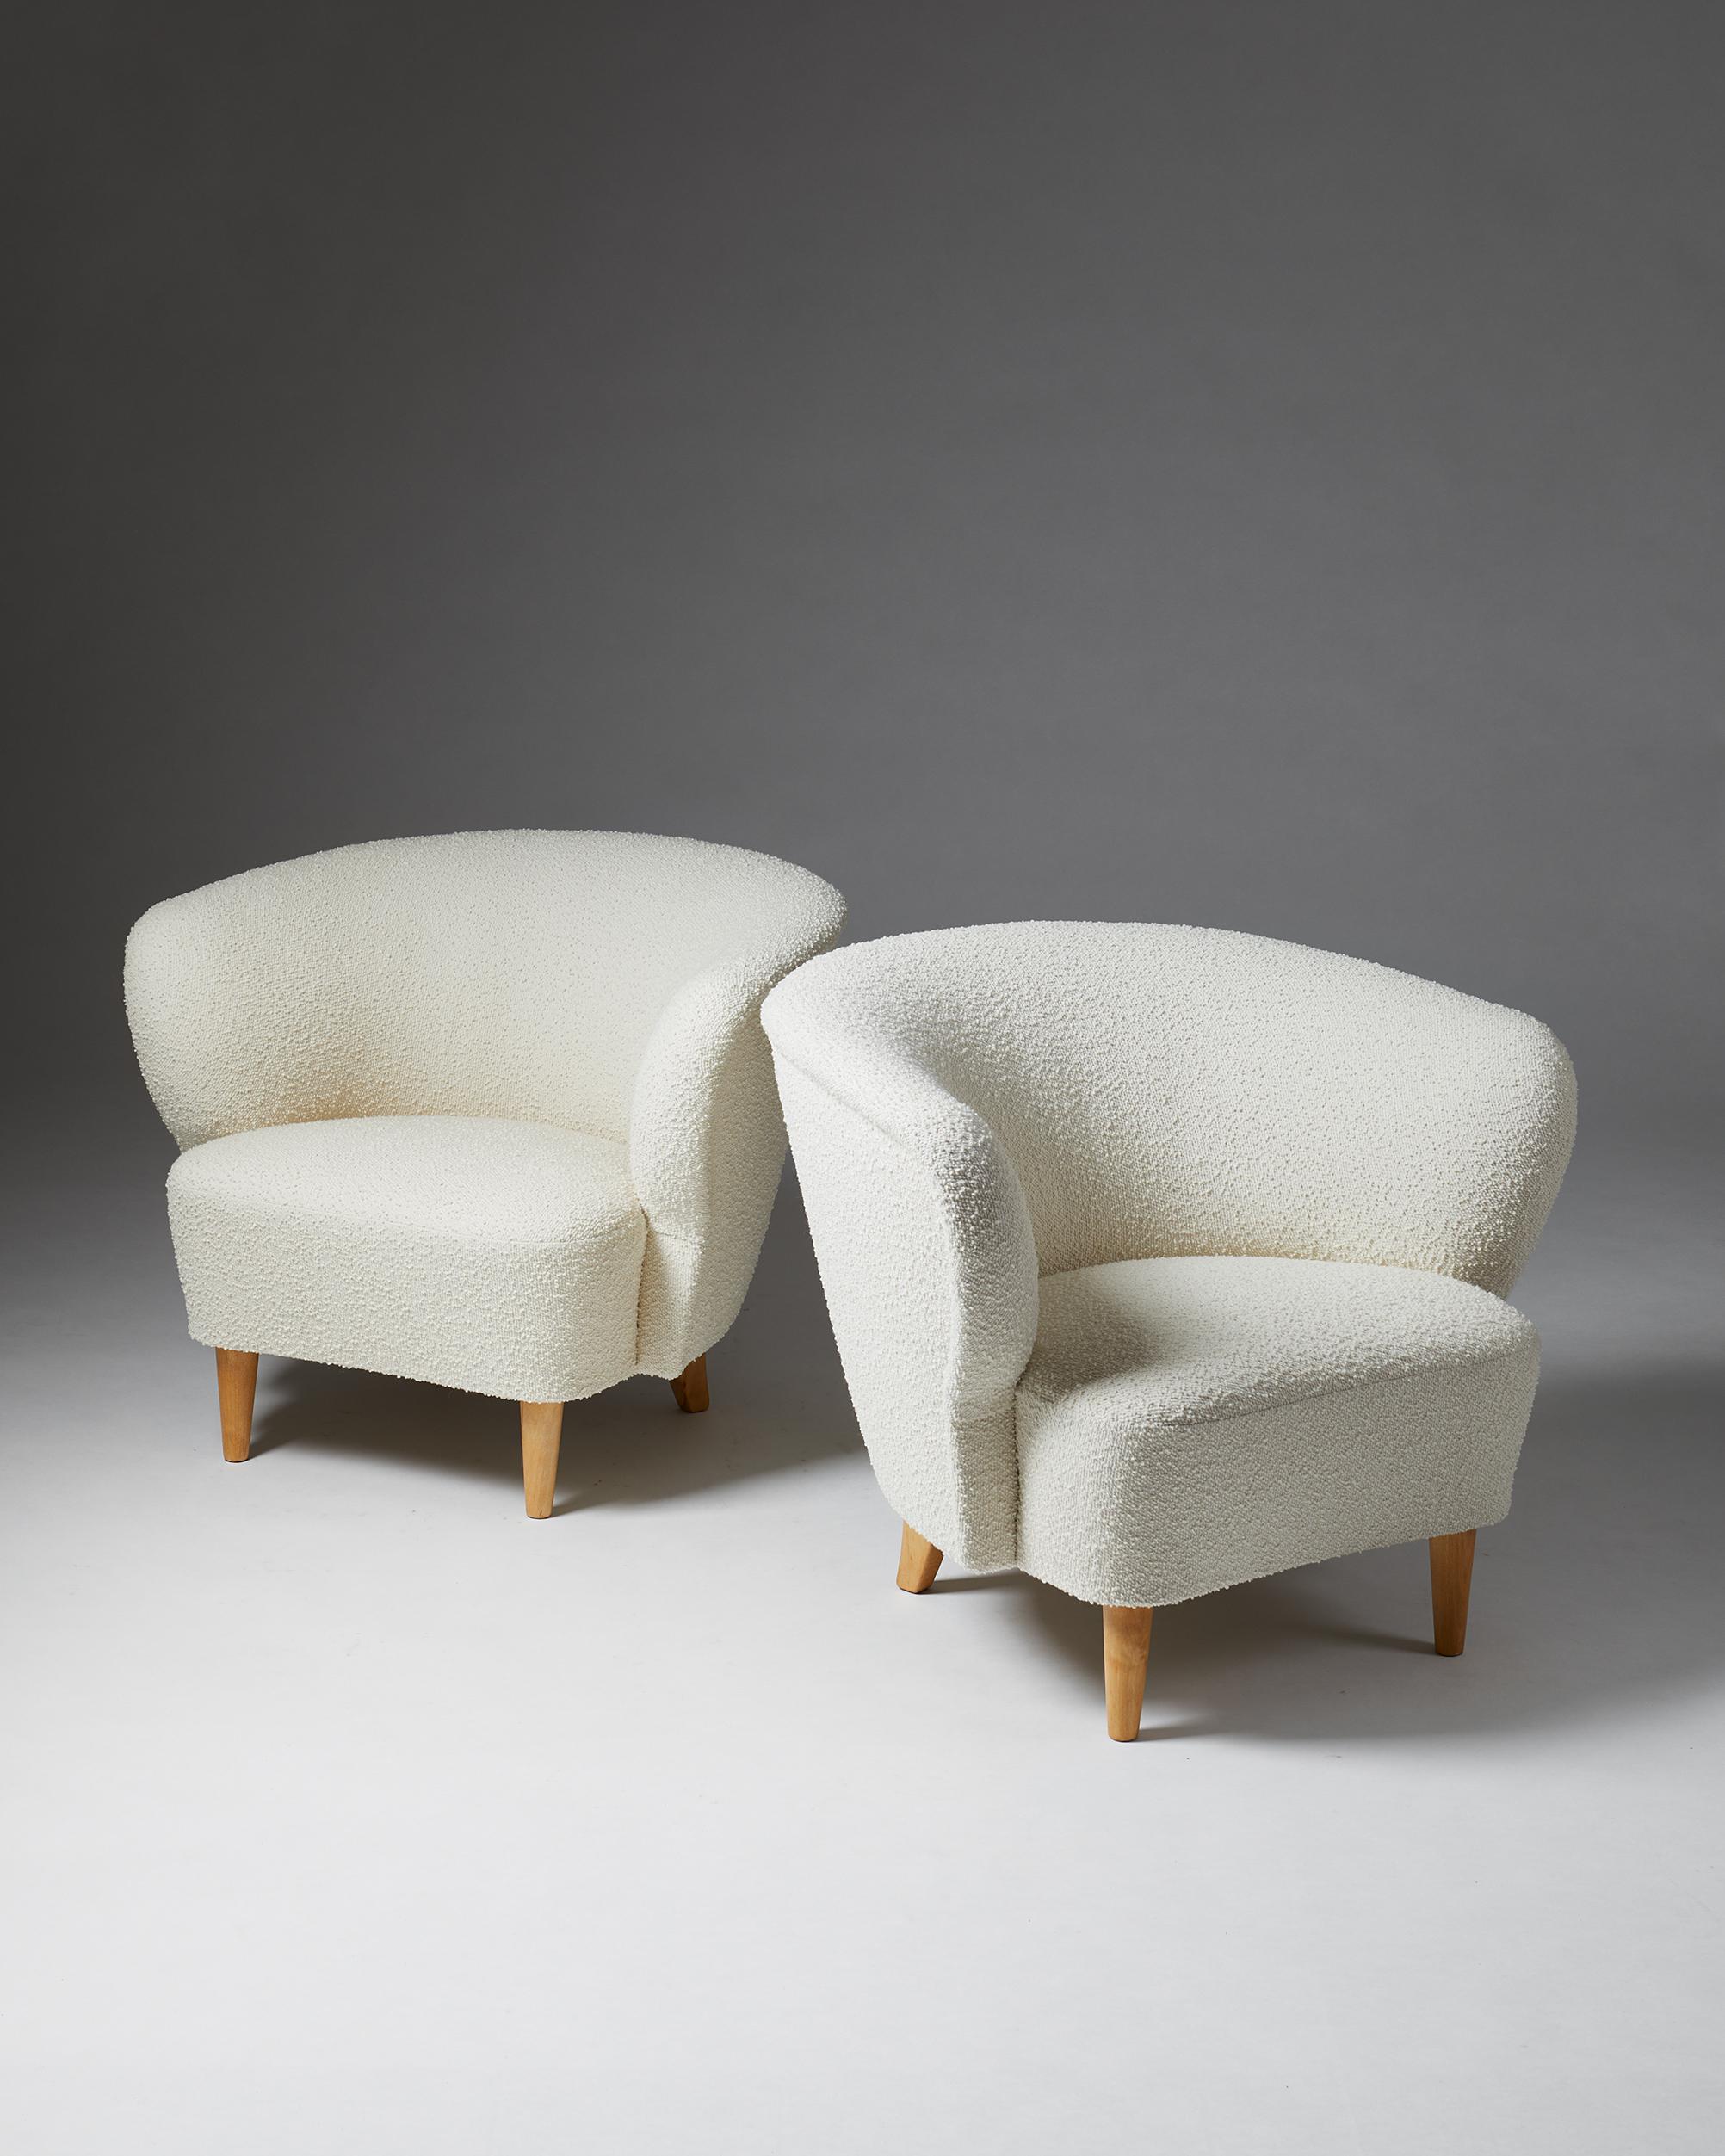 Pair of armchairs, anonymous,
Finland, 1940s.
Lacquered wood and wool upholstery.

Measures: W: 85 cm/ 2' 10